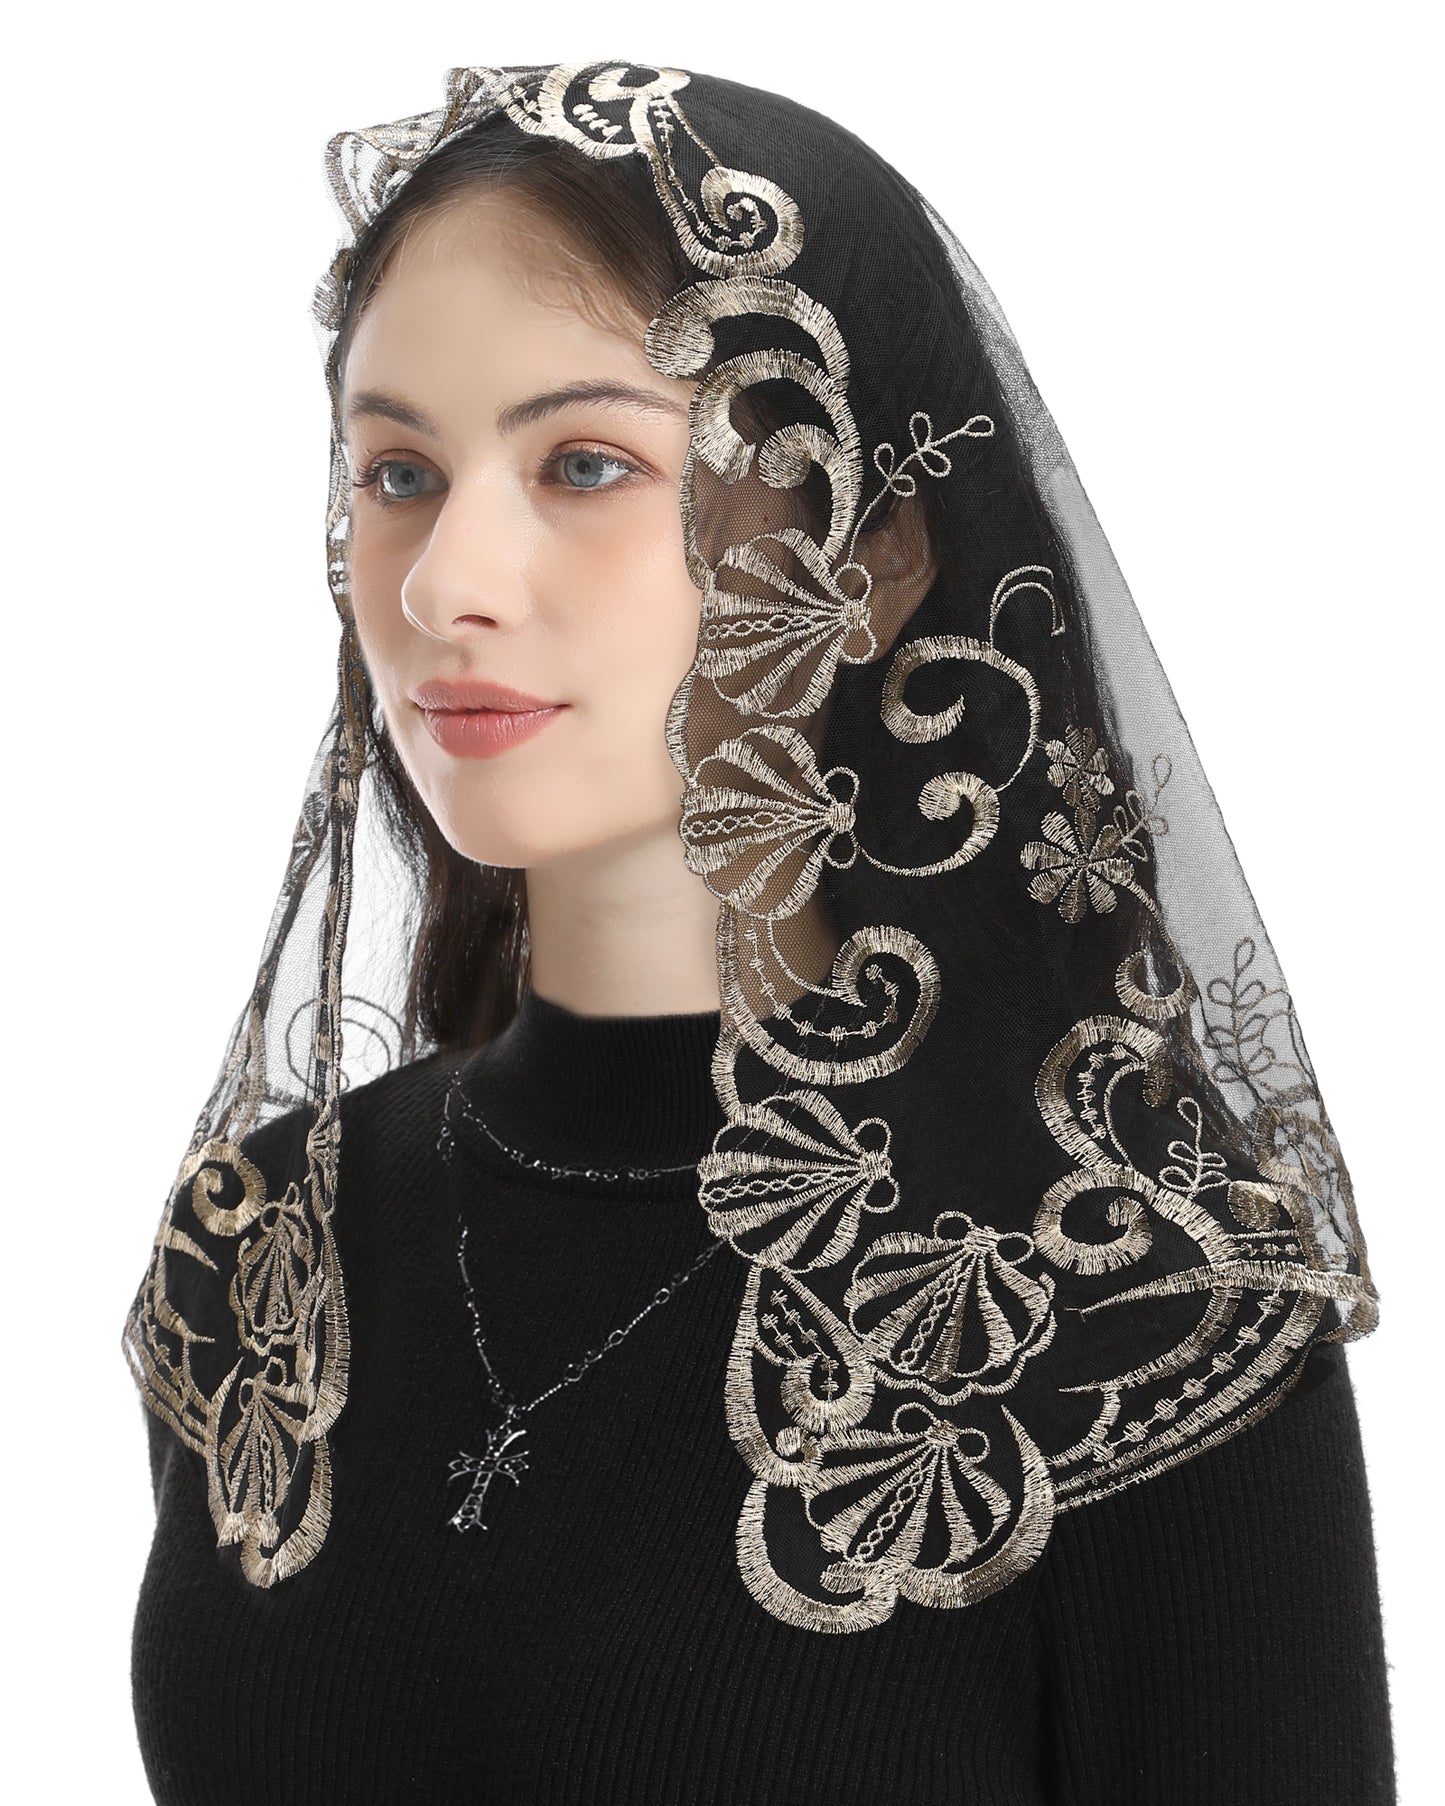 Bozidol Cross Religious Lace Veil- Catholic Embroidered Cross and Shell Creative Design Religious Ladies Prayer Lace D Shape Veil